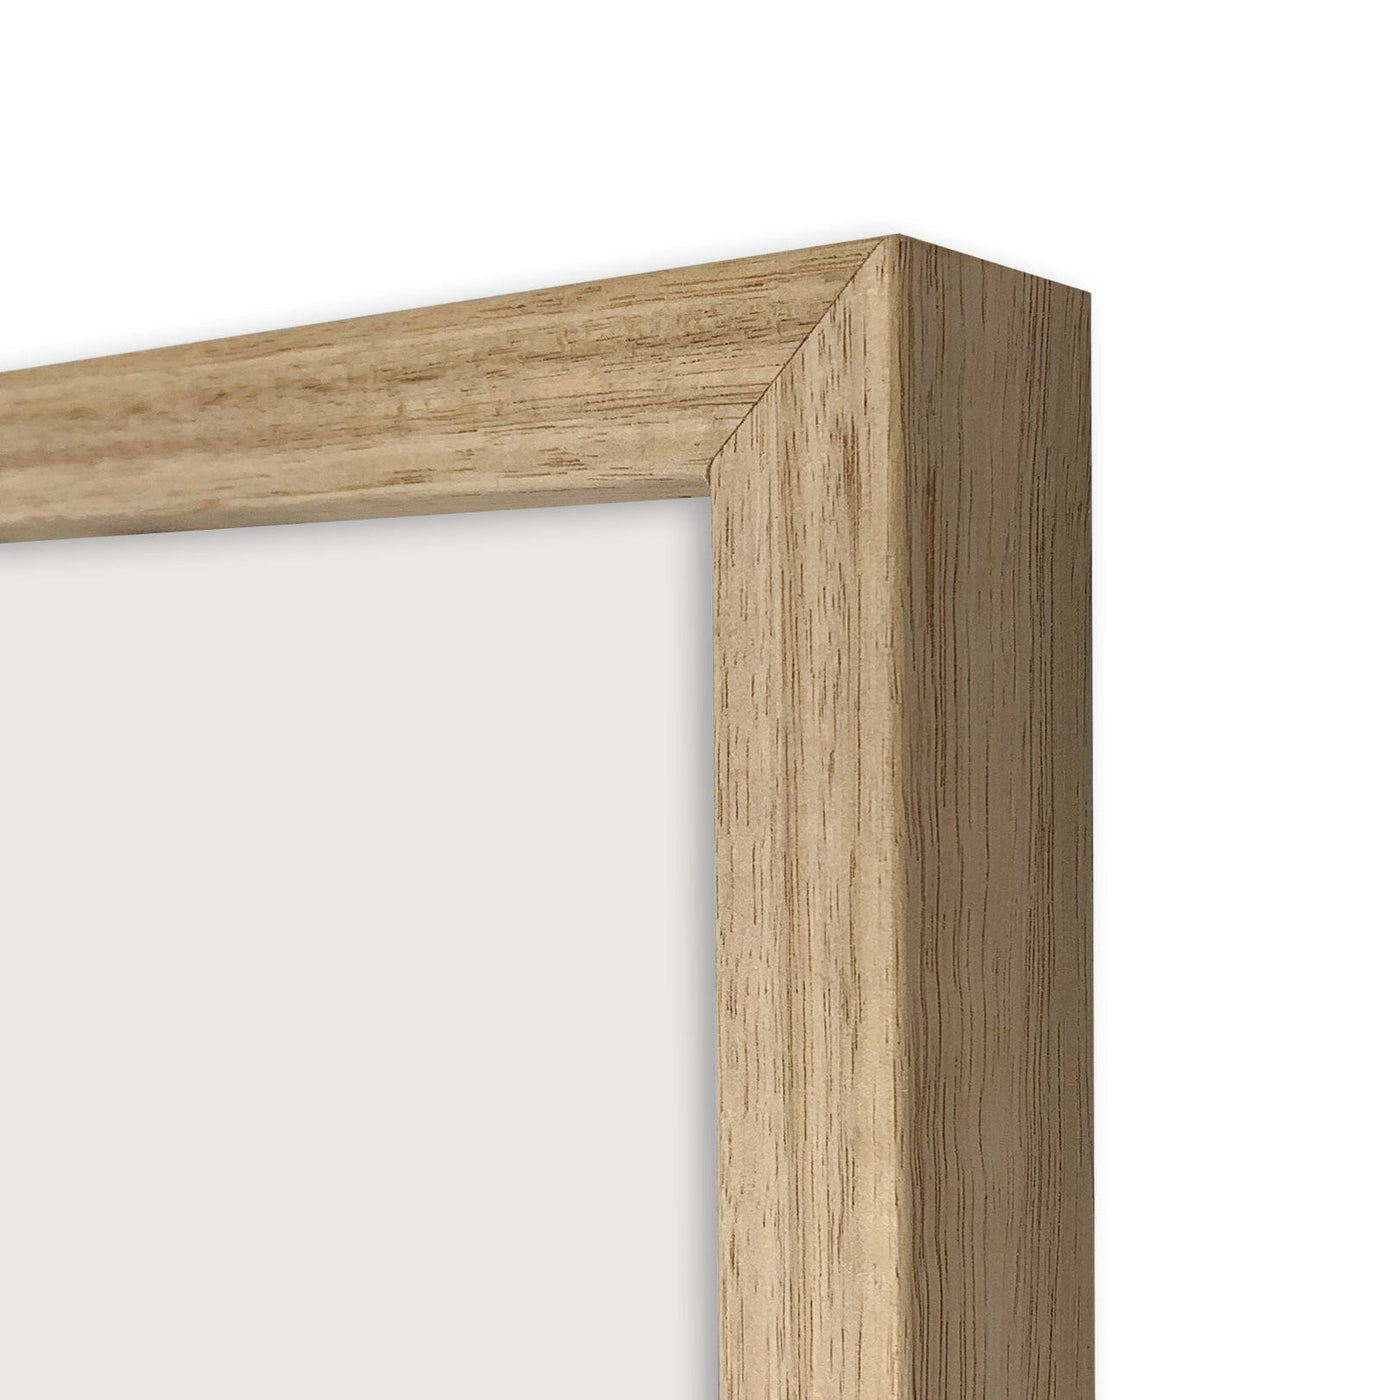 Elegant Victorian Ash Natural Oak A3 Picture Frame from our Australian Made A3 Picture Frames collection by Profile Products Australia